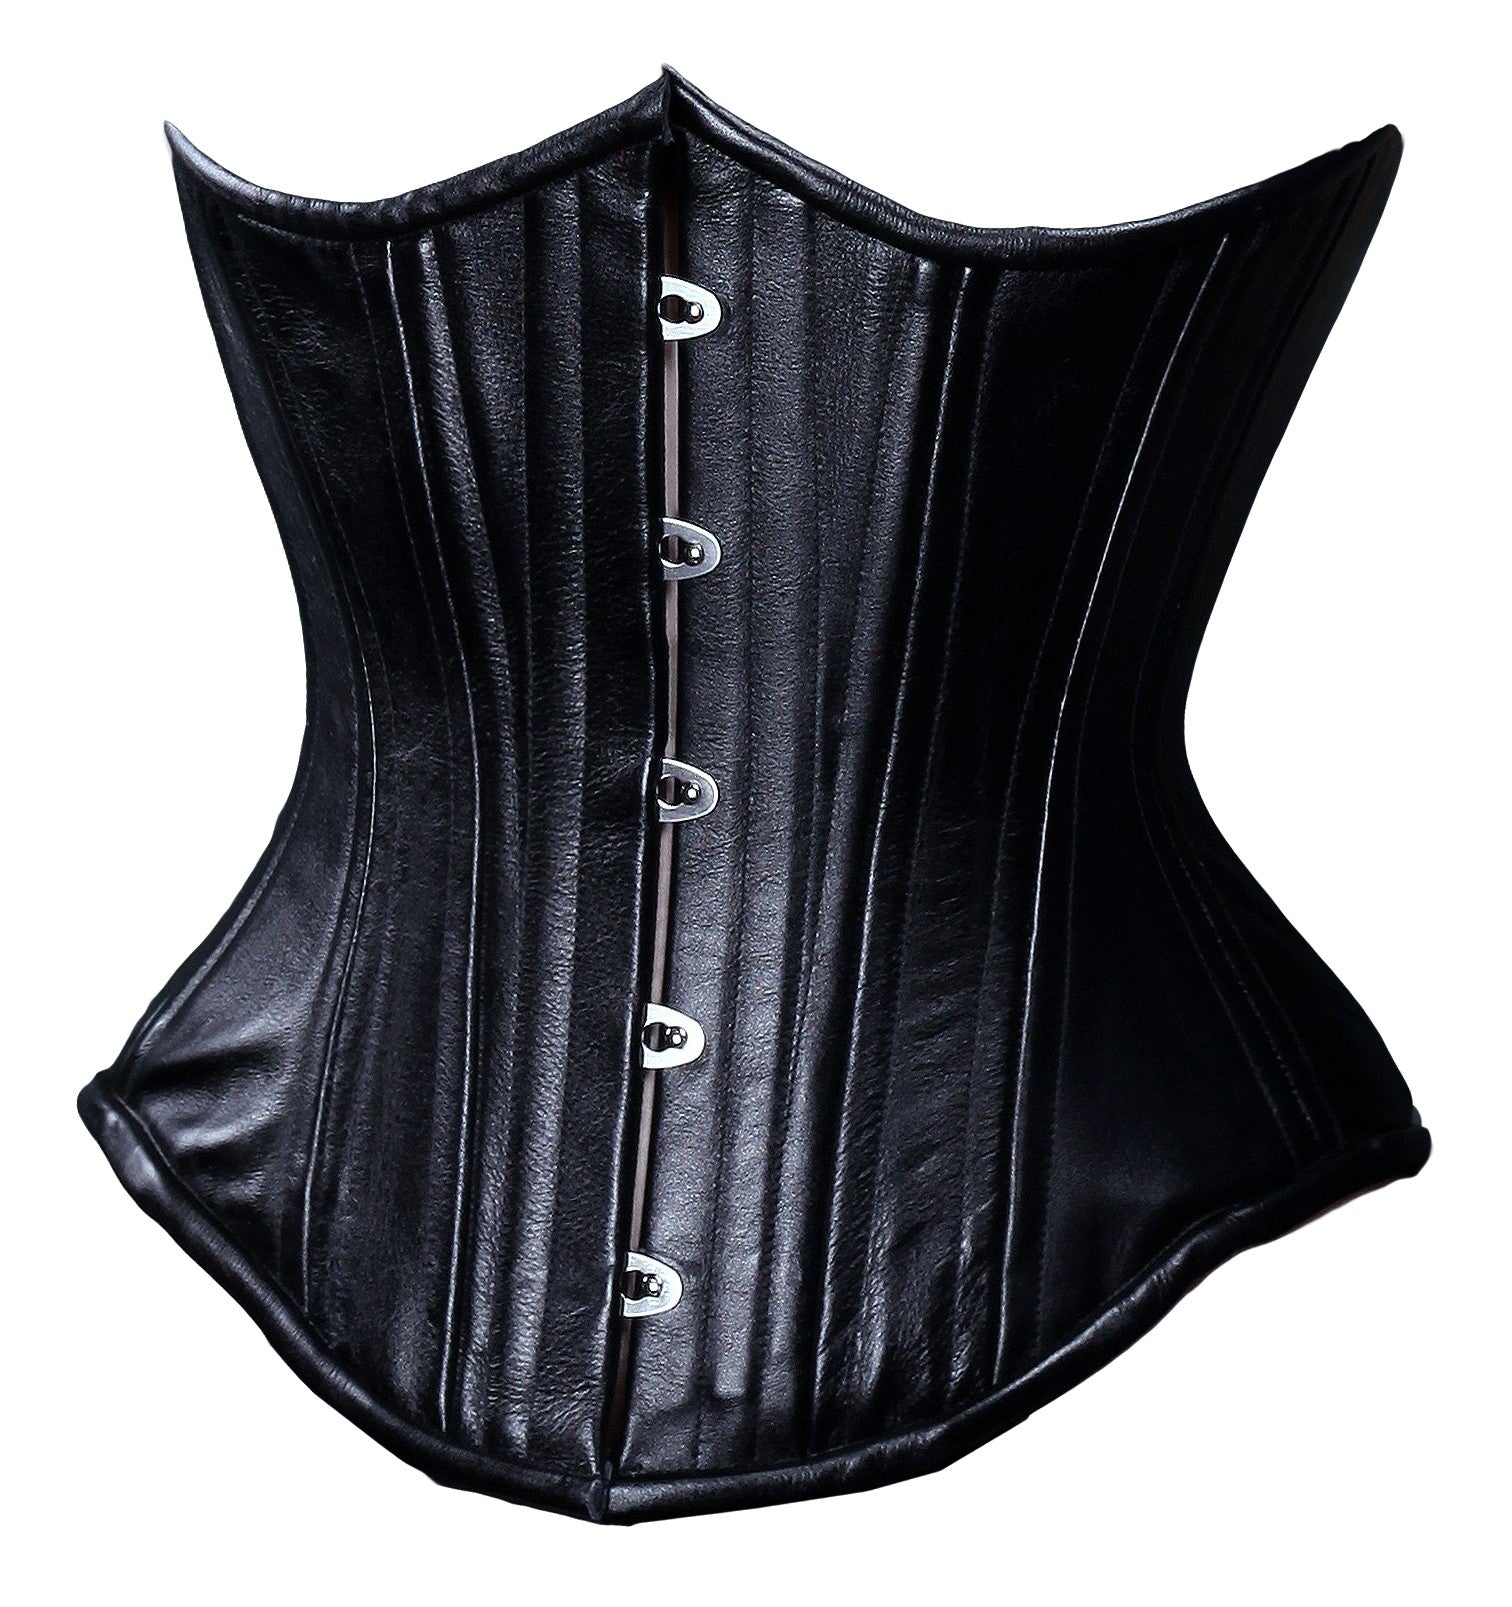 Why Corsets Are Expensive